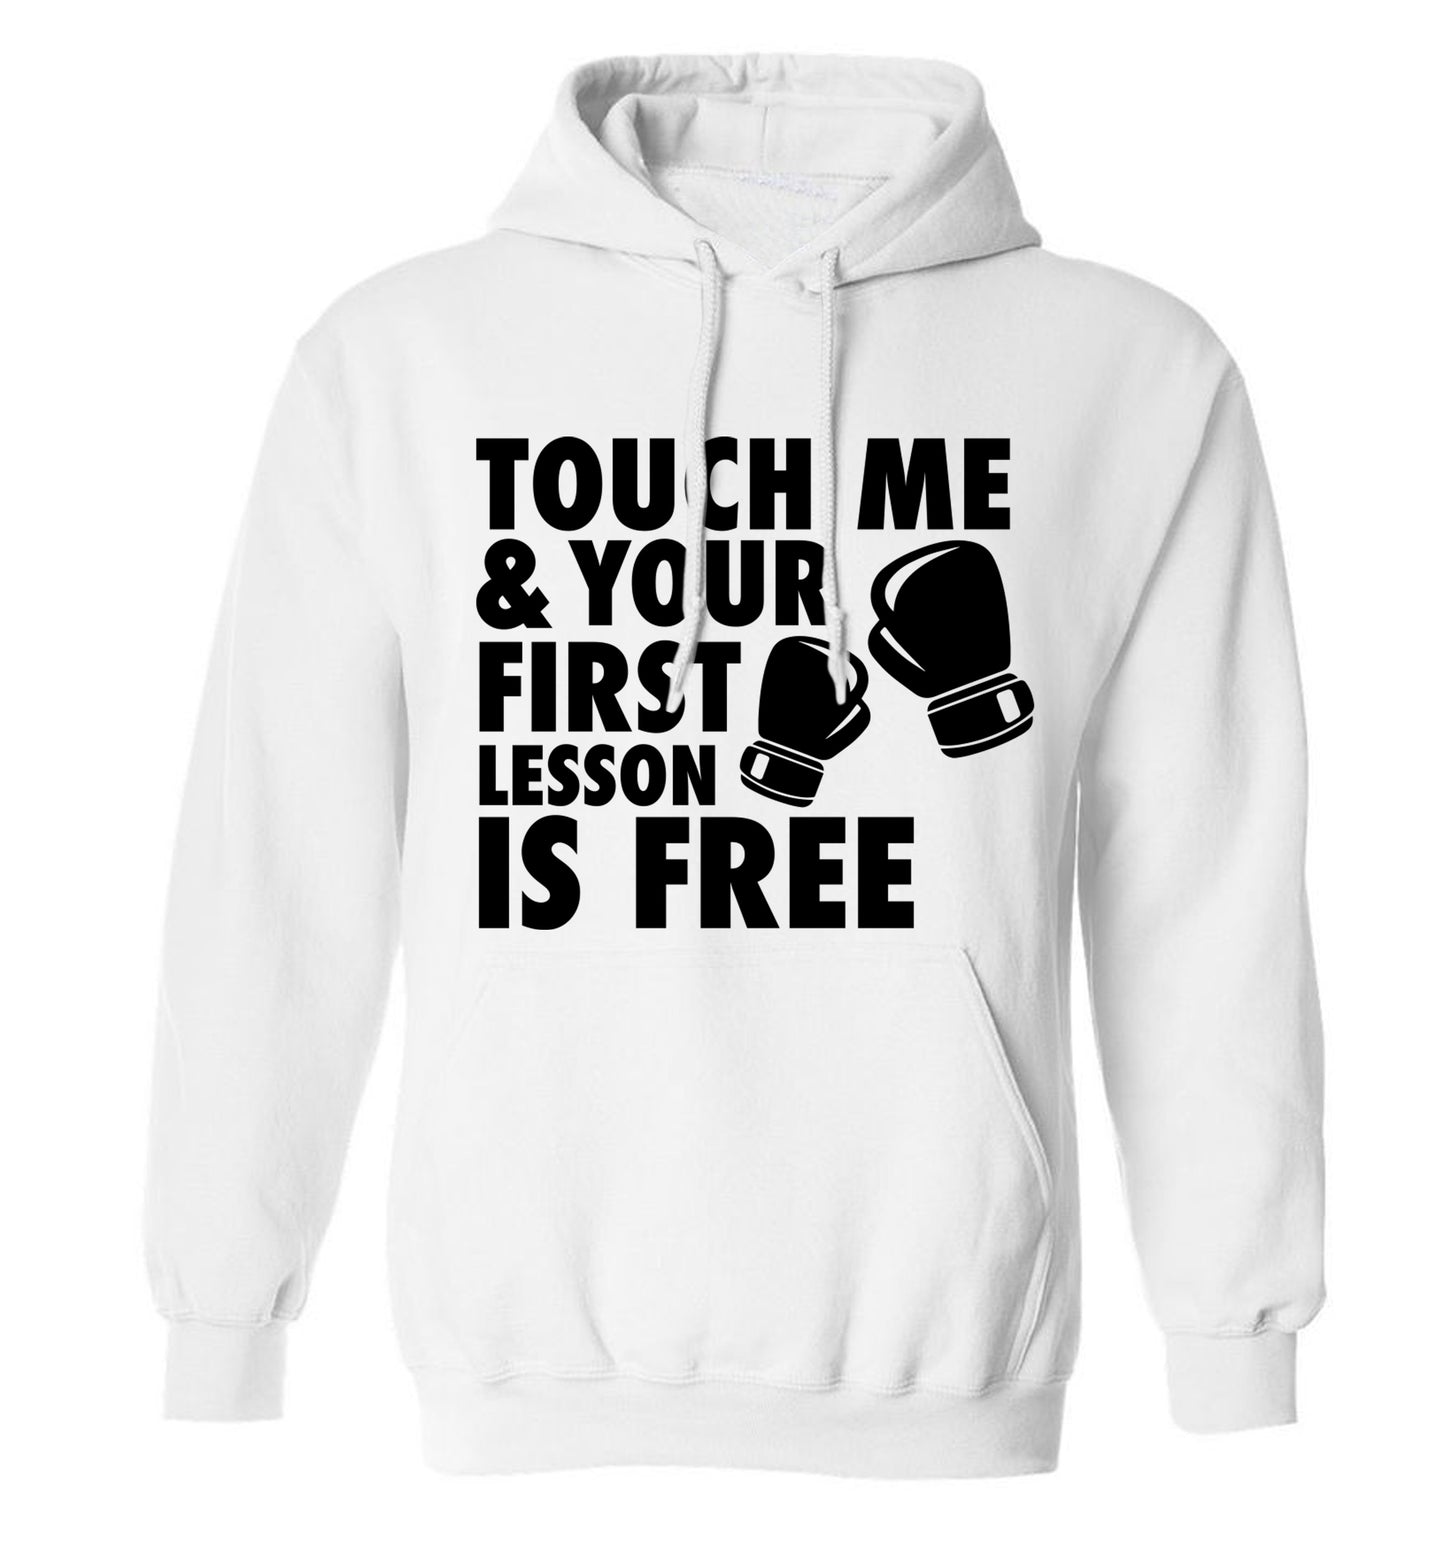 Touch me and your First Lesson is Free  adults unisex white hoodie 2XL